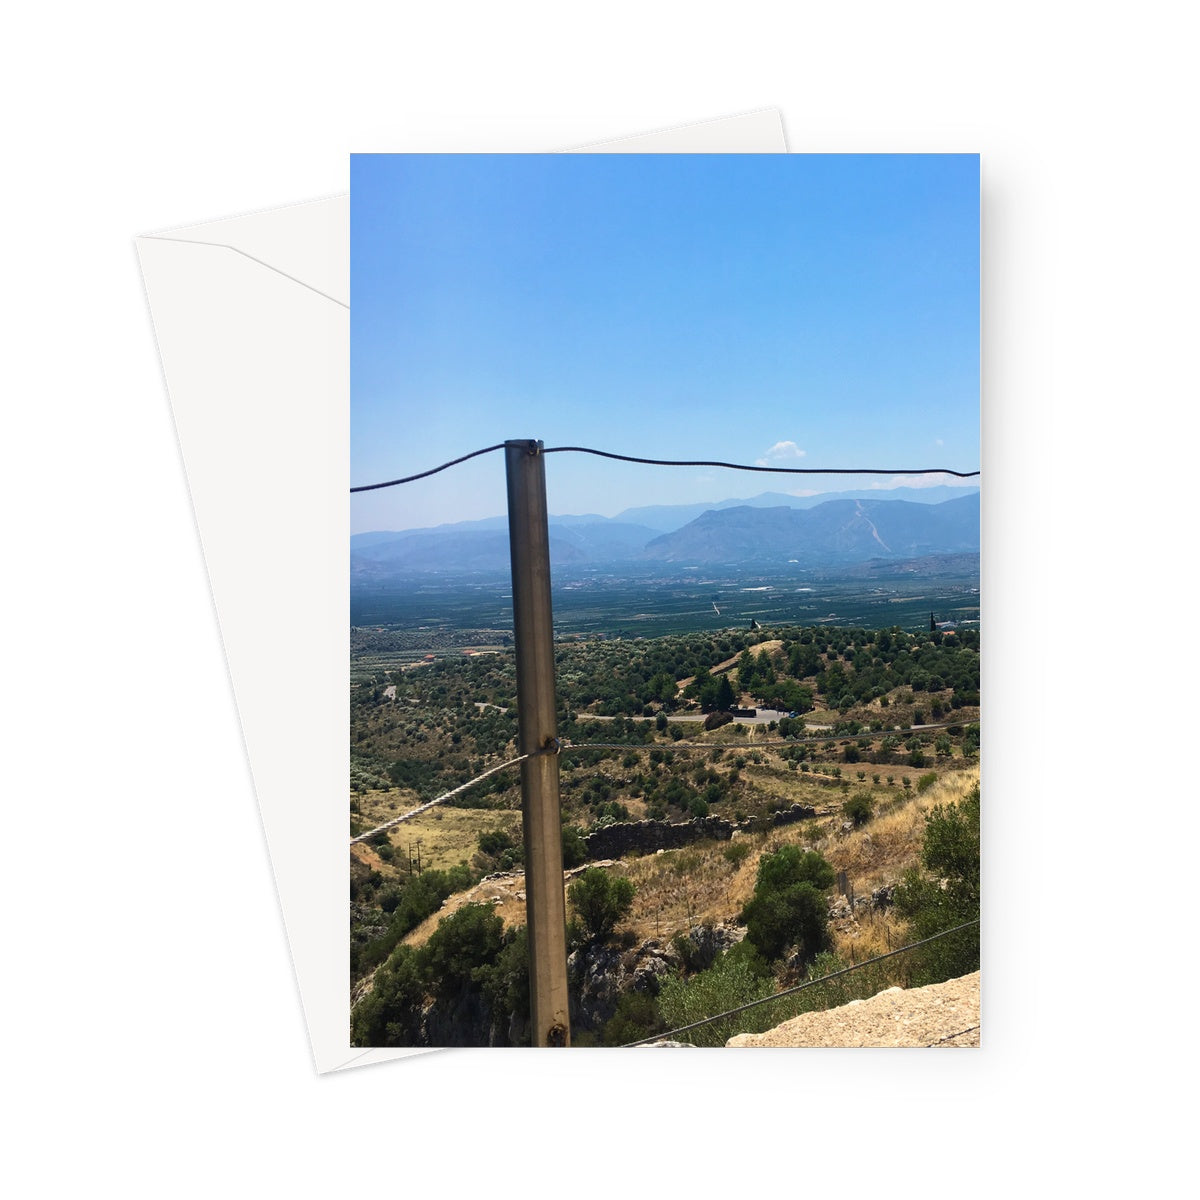 This greeting card shows the view from the top of the ancient Greek settlement in Mycenae, overlooking the Greek countryside. In the foreground is a metal wire fence.